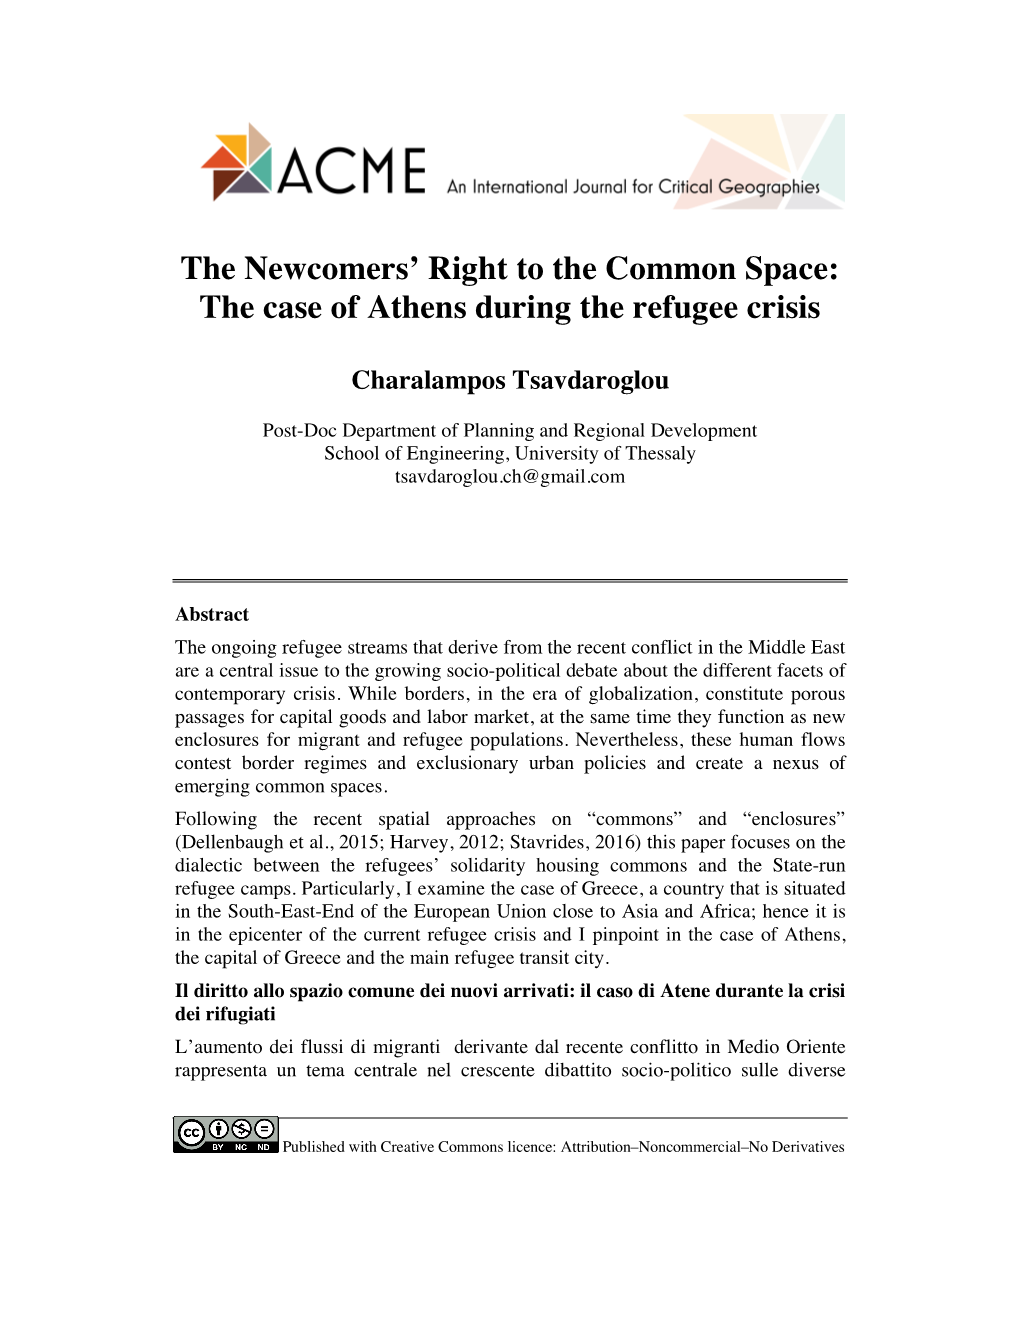 The Case of Athens During the Refugee Crisis